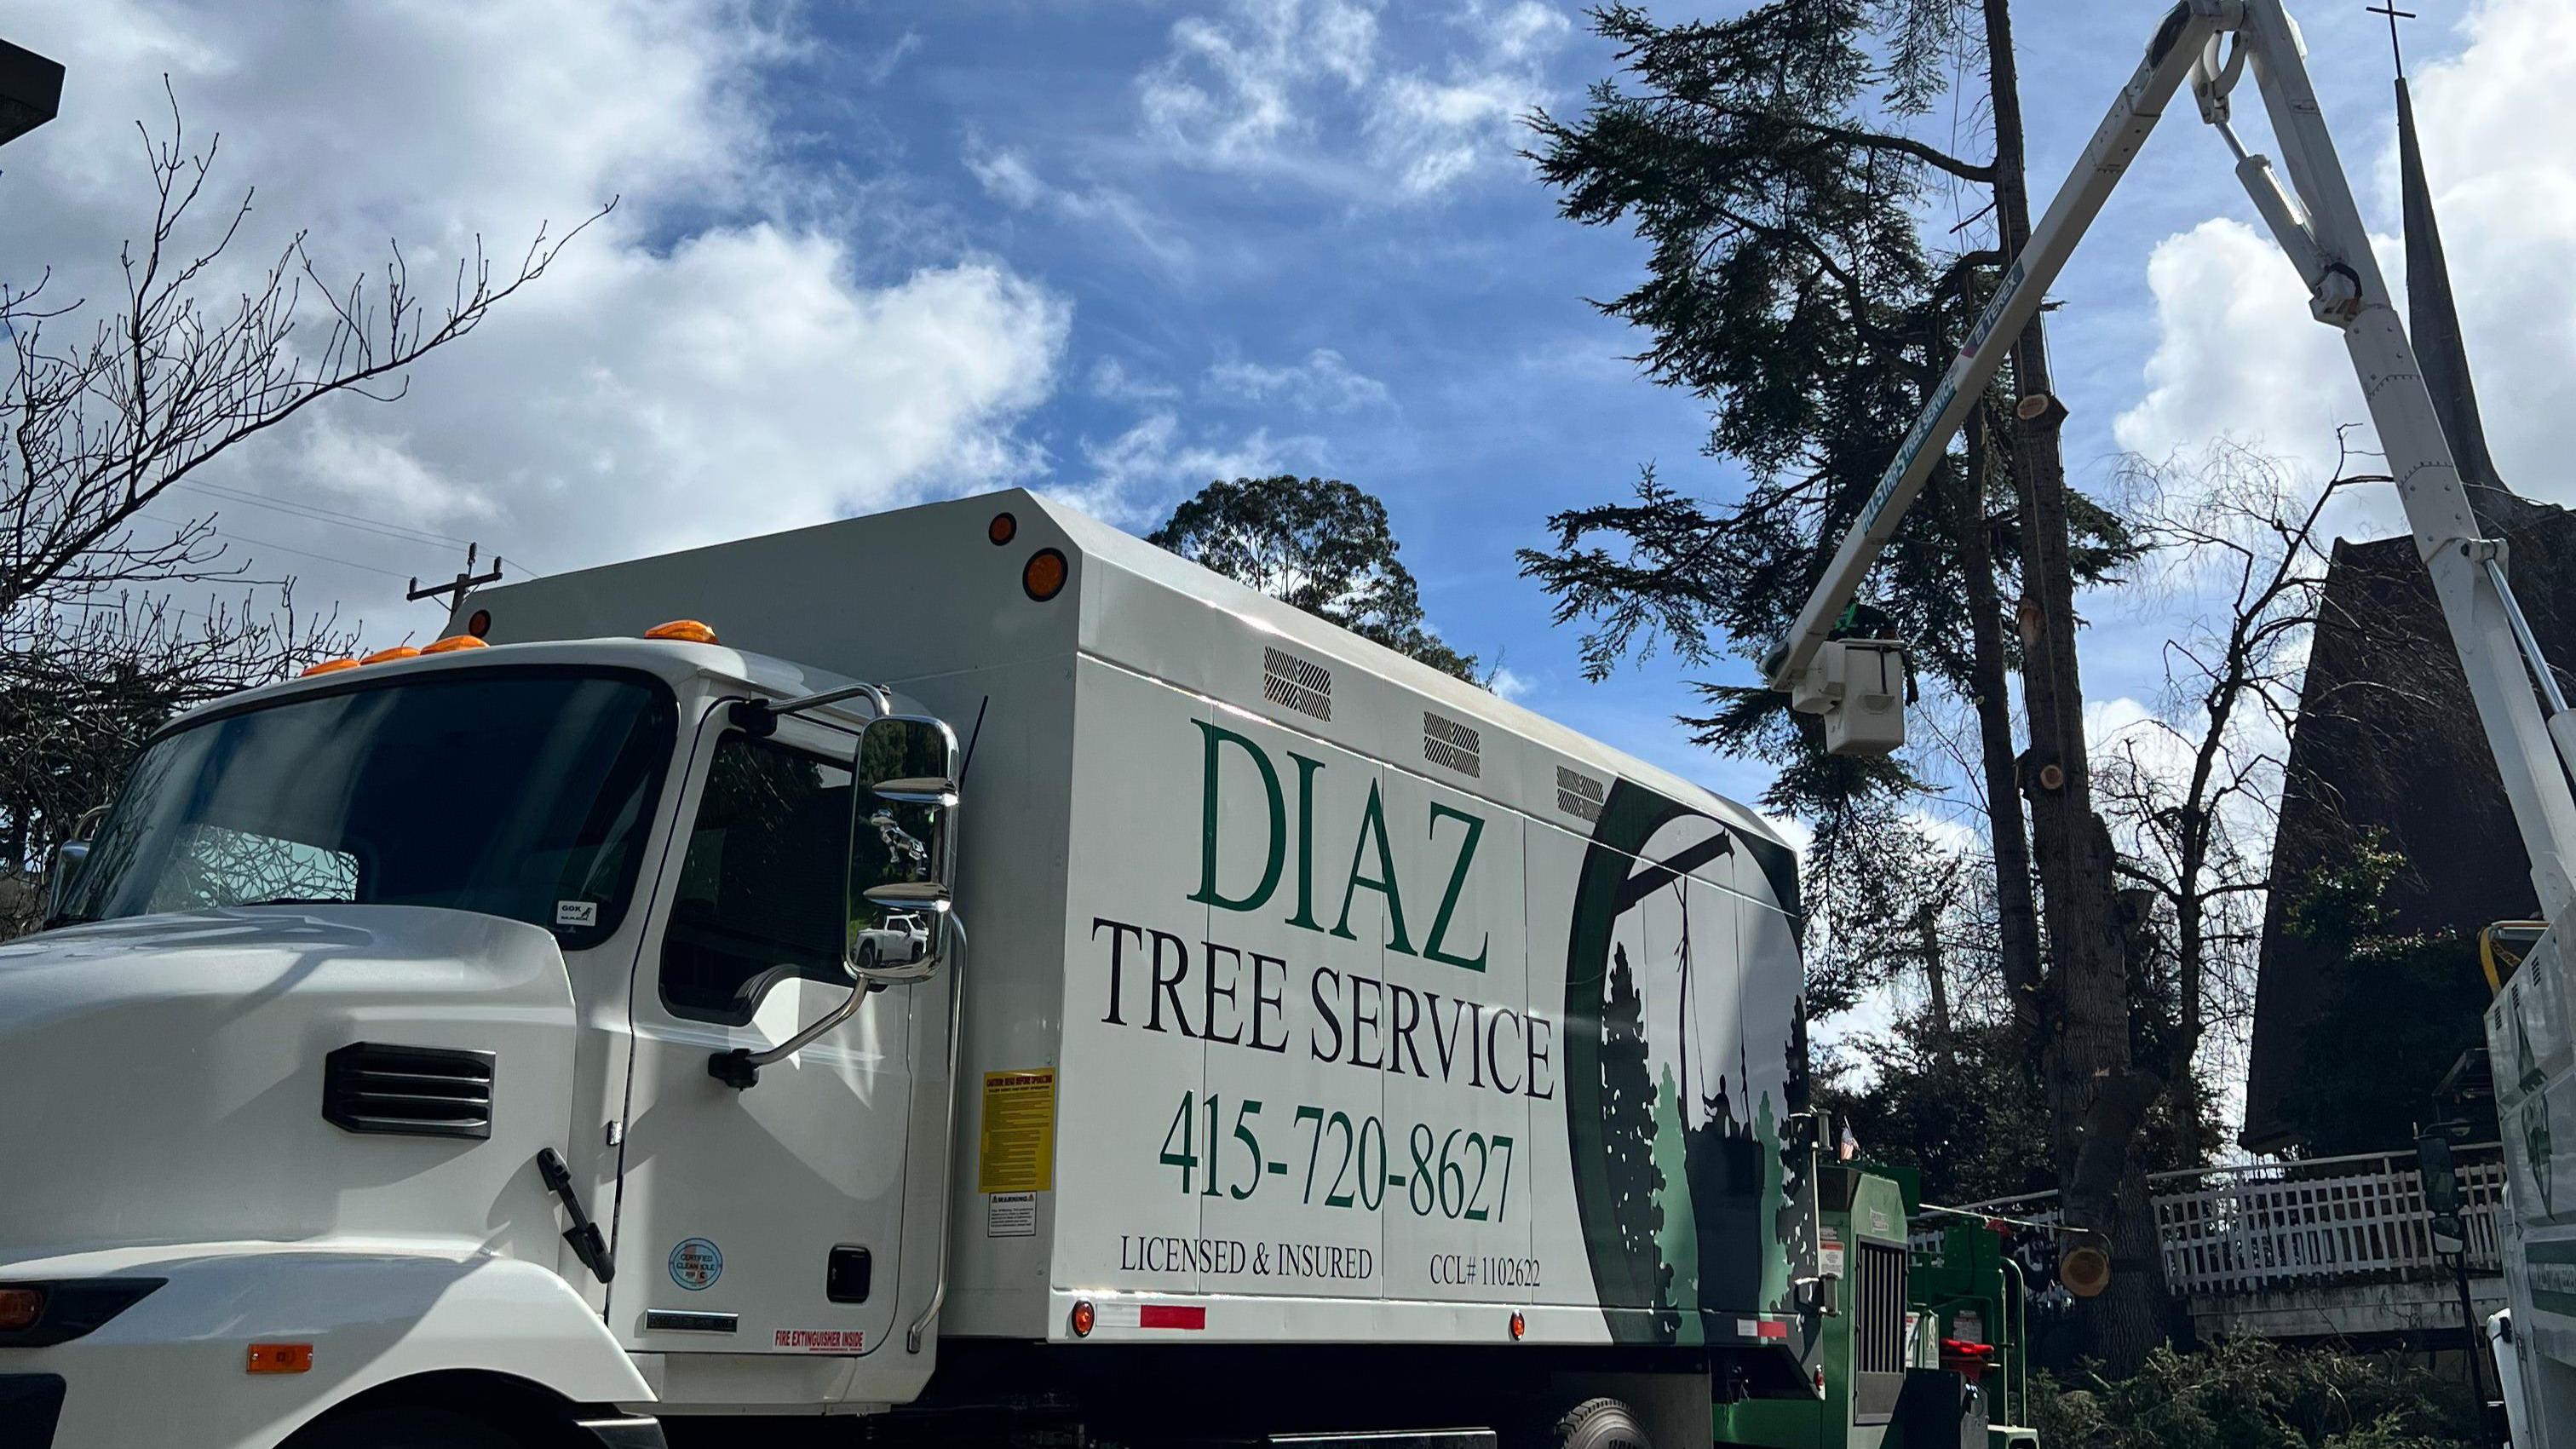 Diaz Tree Service, Inc. offers a wide range of tree care services to meet your property's needs. From routine maintenance to emergency tree care, our experienced arborists provide personalized solutions tailored to your trees' health and well-being. Whether you need pruning, removal, or disease management, count on us for reliable and professional tree care services.